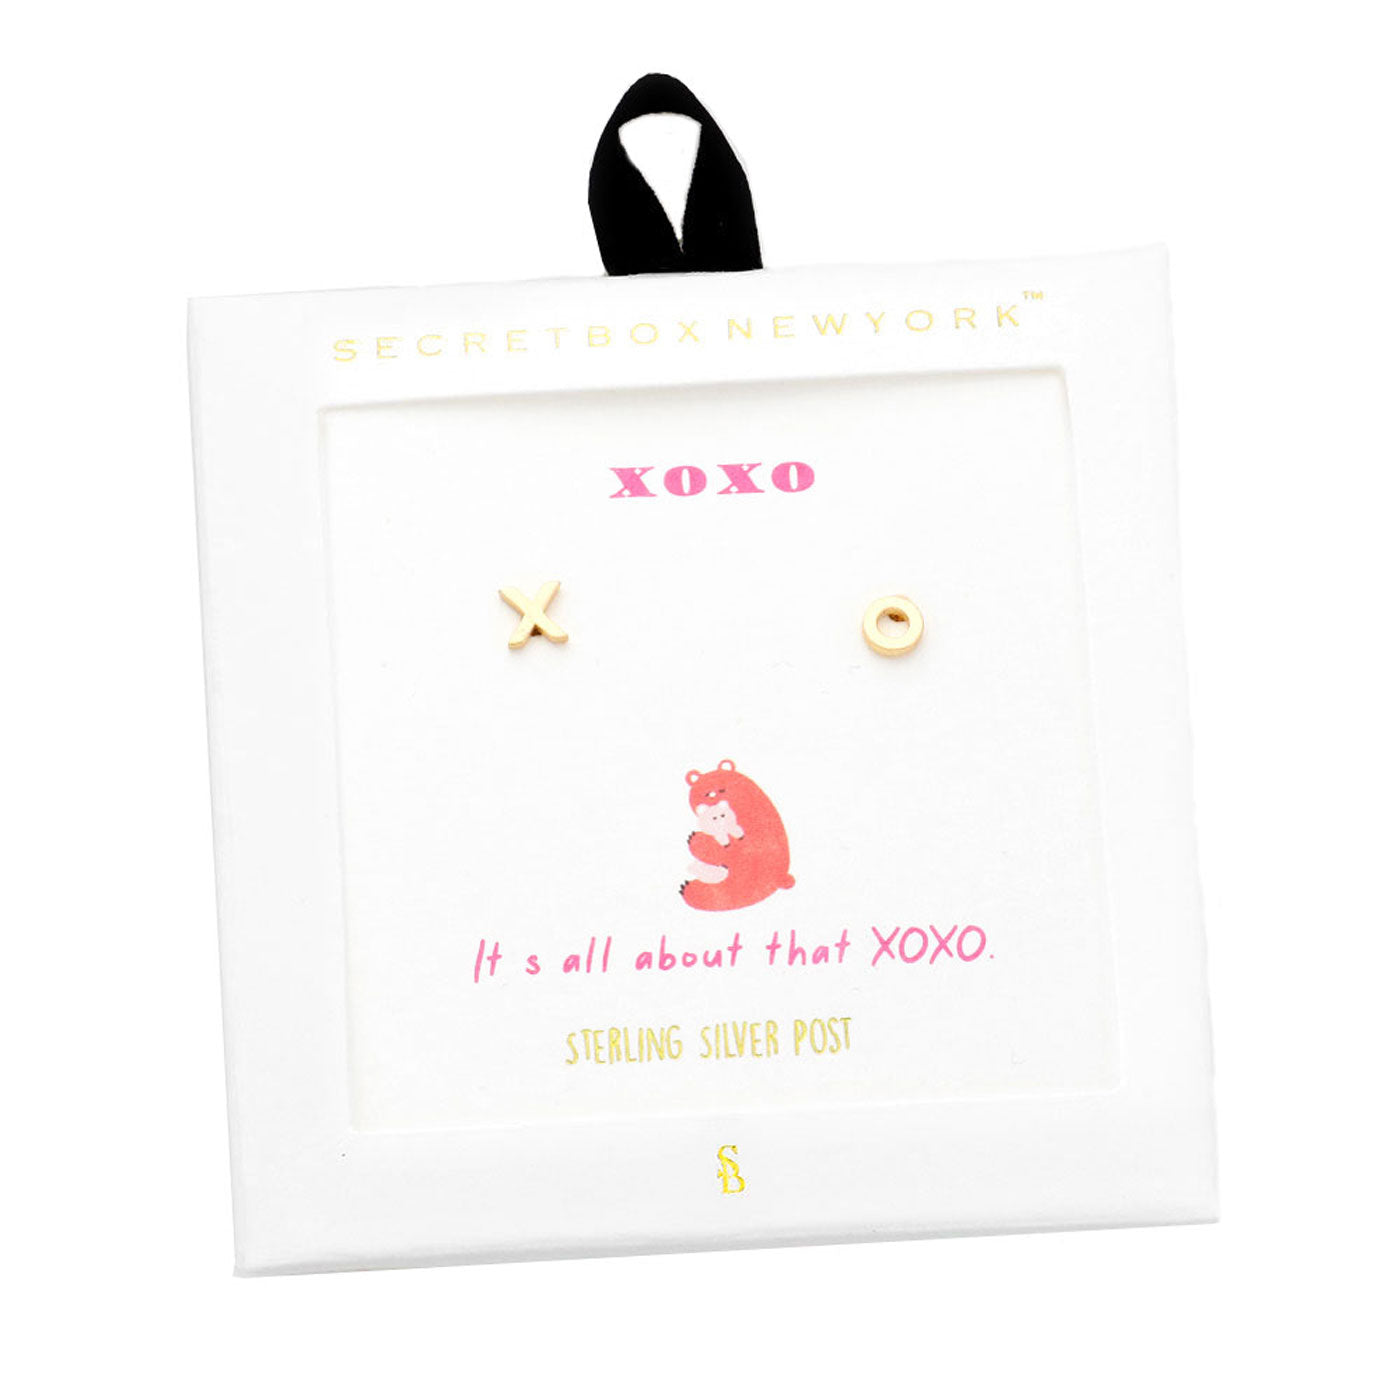 Worn Gold Secret Box Metal XO Message Stud Earrings, put on a pop of color to complete your ensemble. Beautifully crafted design adds a gorgeous glow to any outfit. Perfect for adding just the right amount of shimmer & shine. Perfect for Birthday Gift, Anniversary Gift, Mother's Day Gift, Graduation Gift, Valentine's Day Gift.